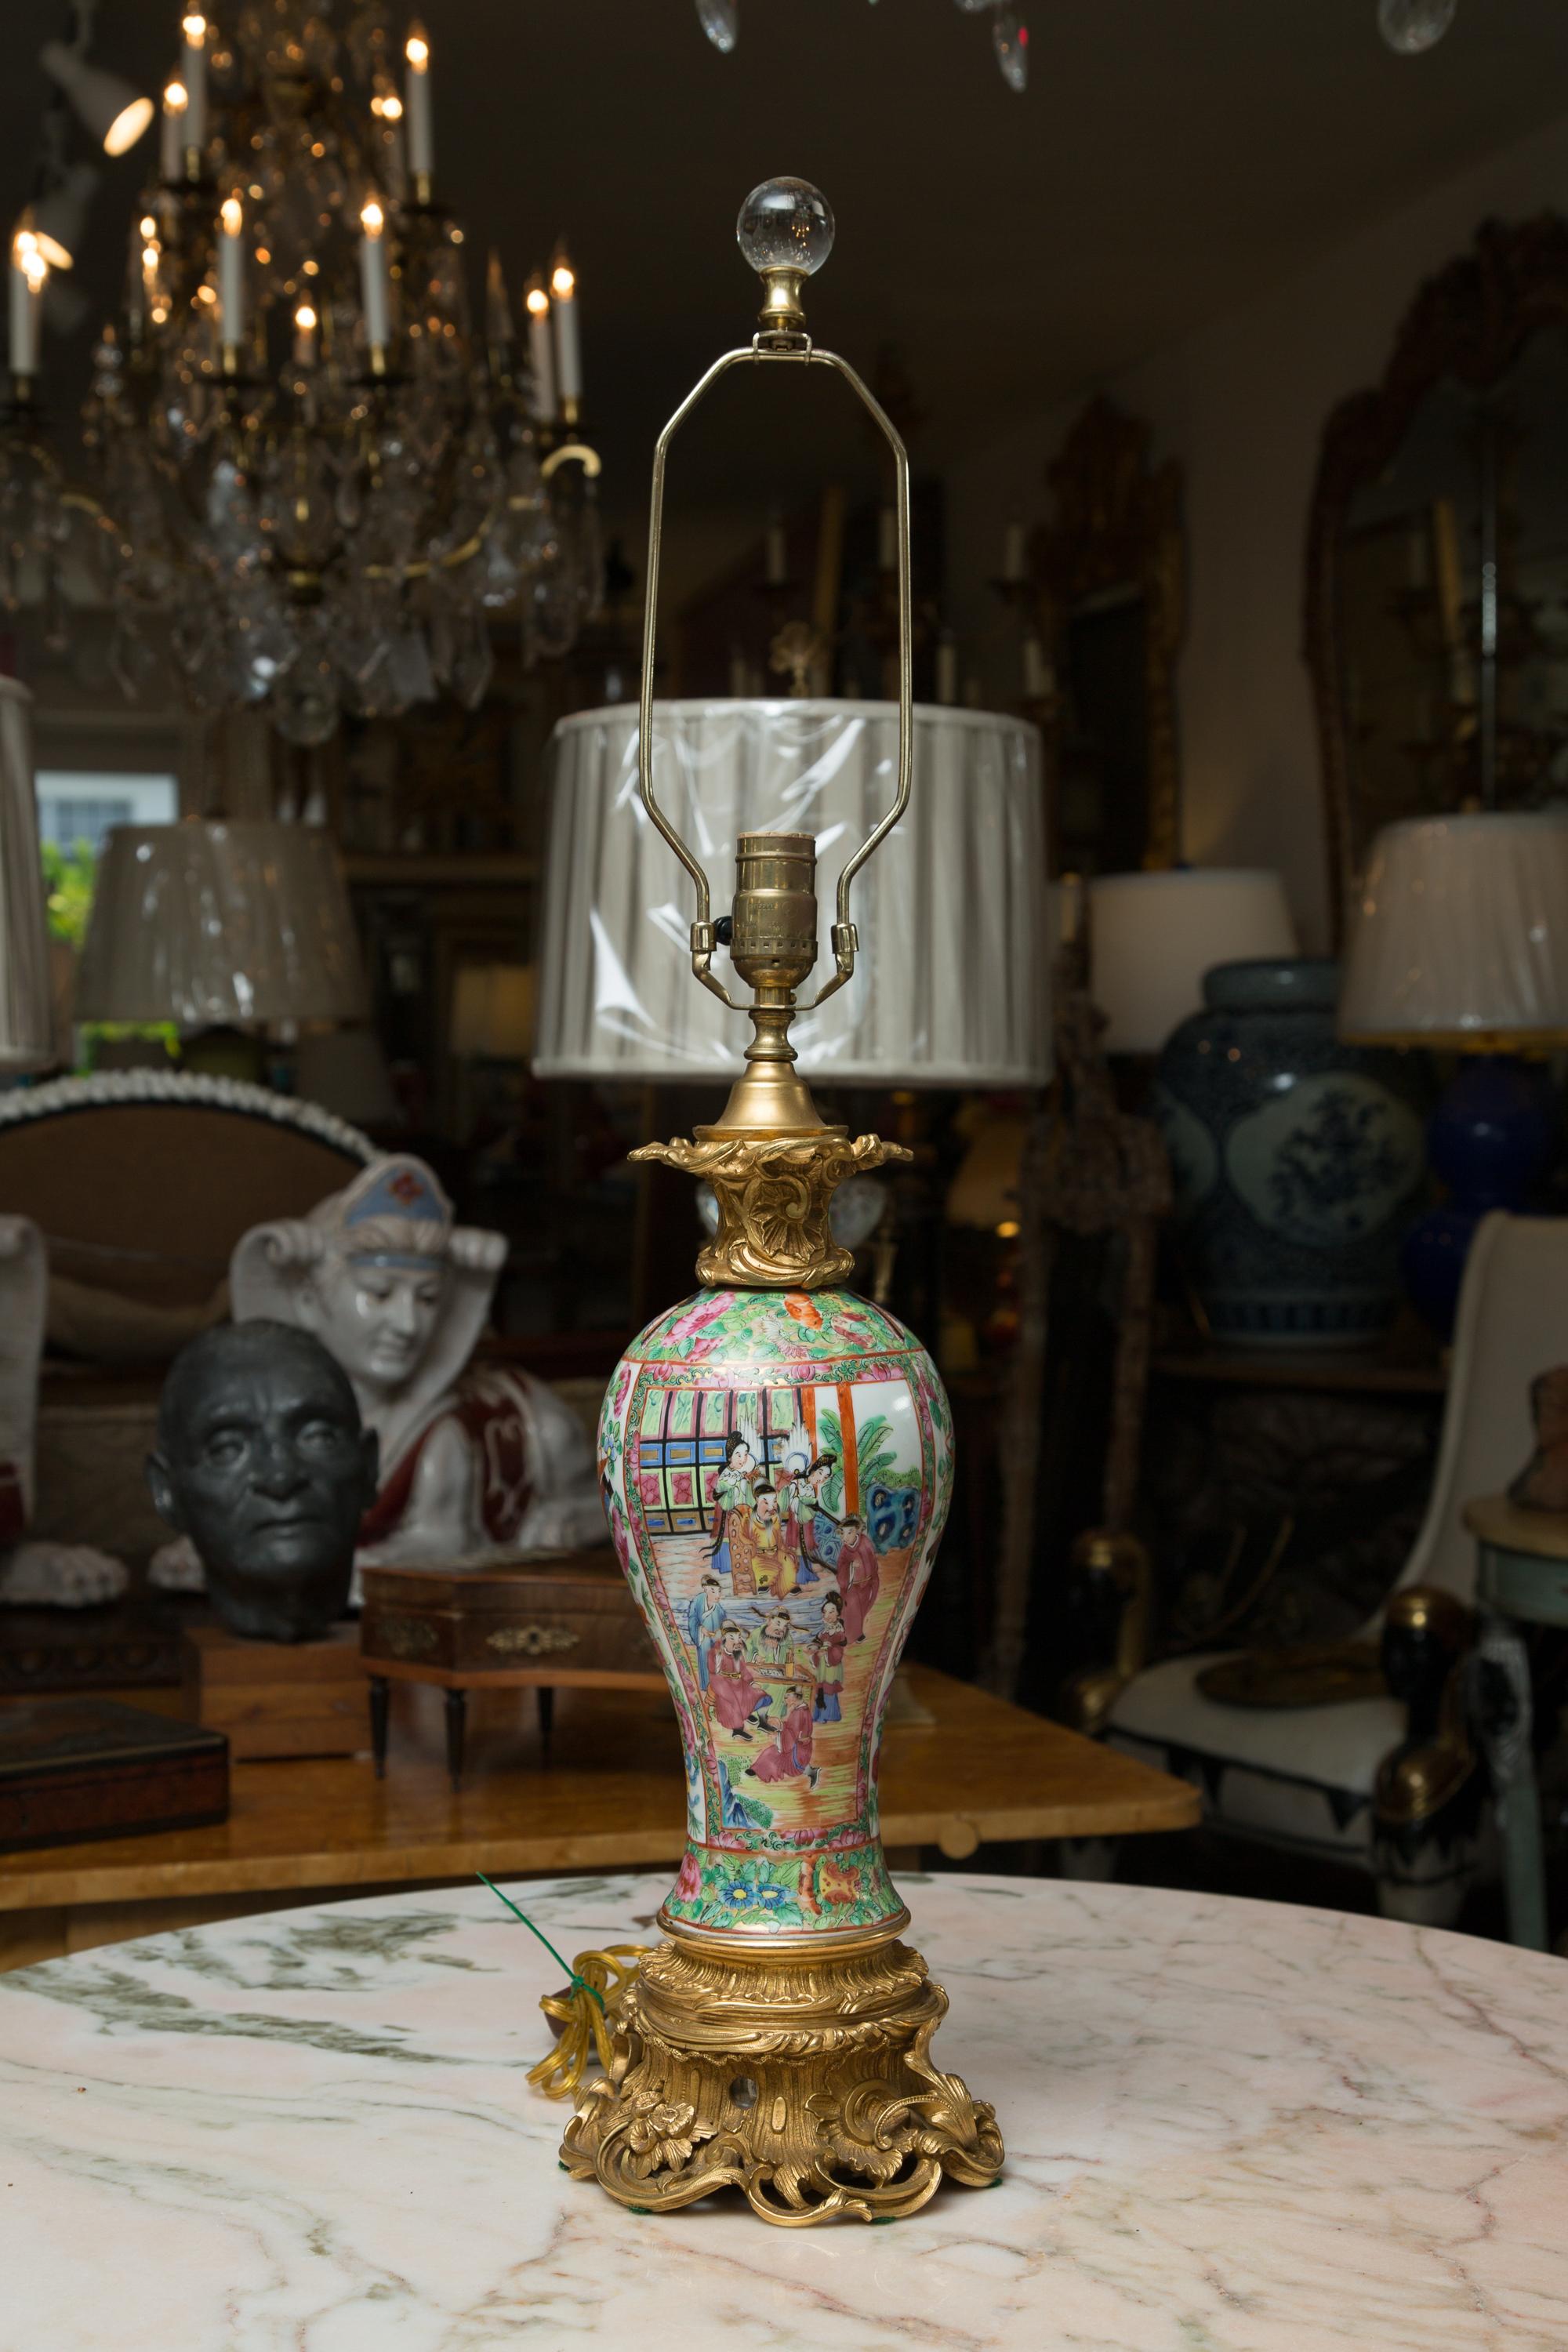 Exquisite pair of Rose Medallion vases as table lamps.